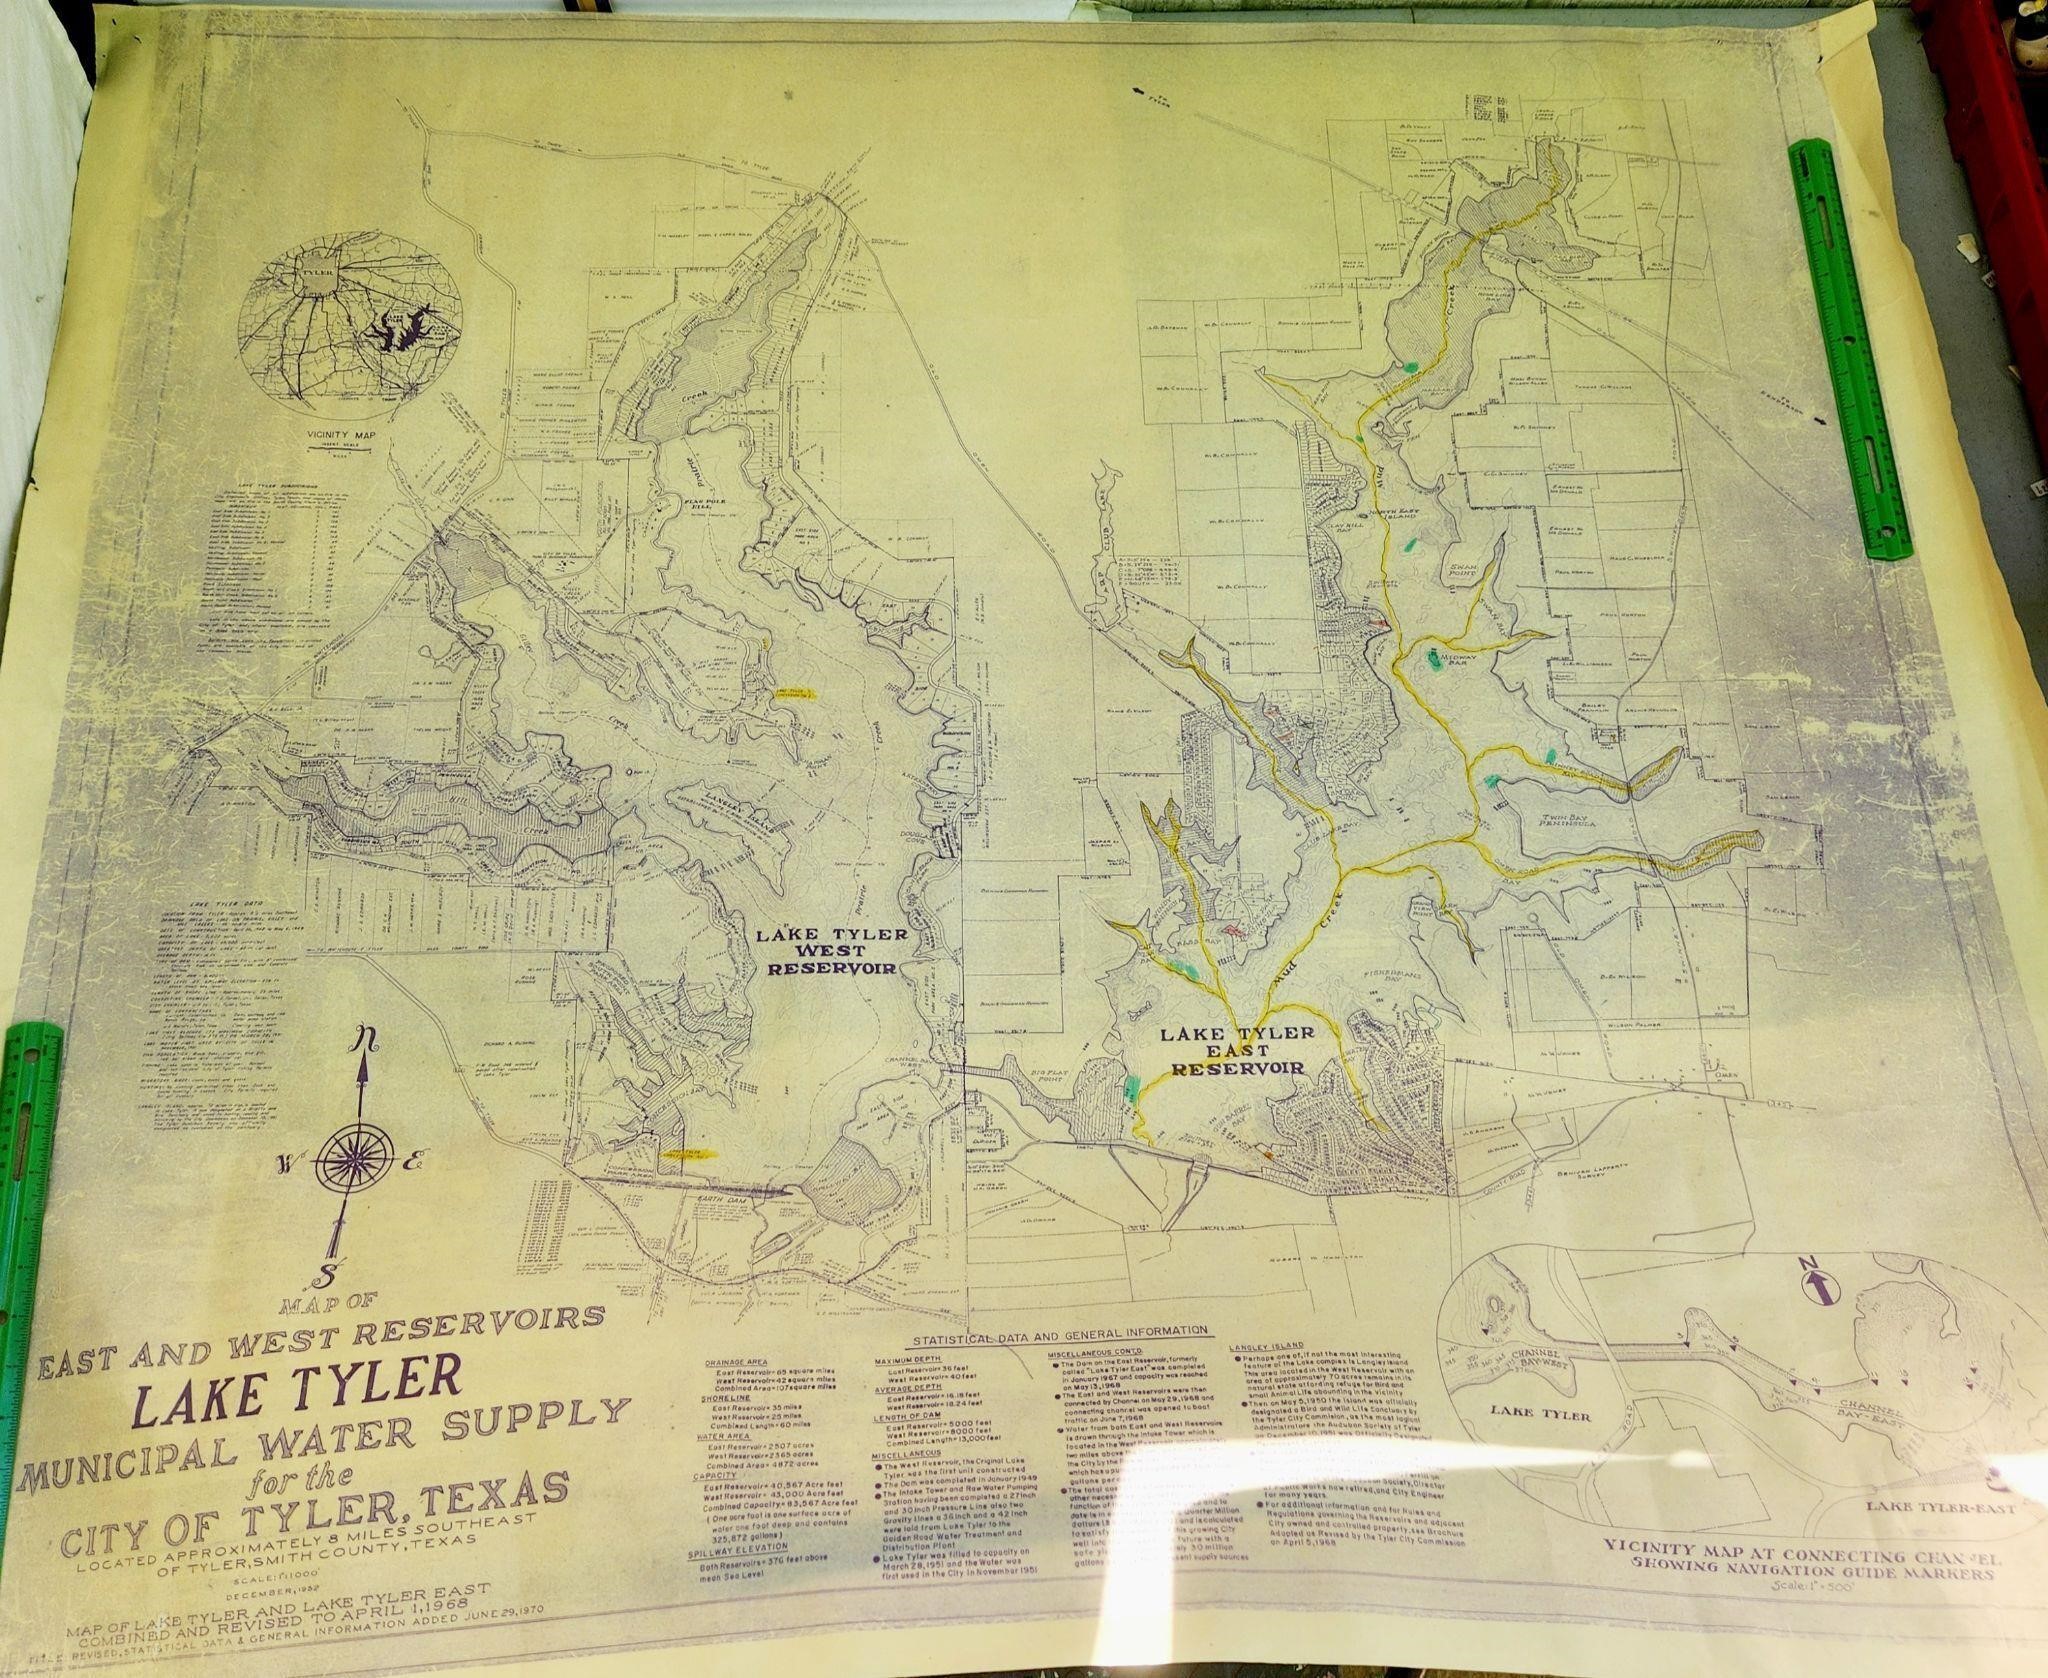 1970 map of Lake Tyler east & west reservoirs